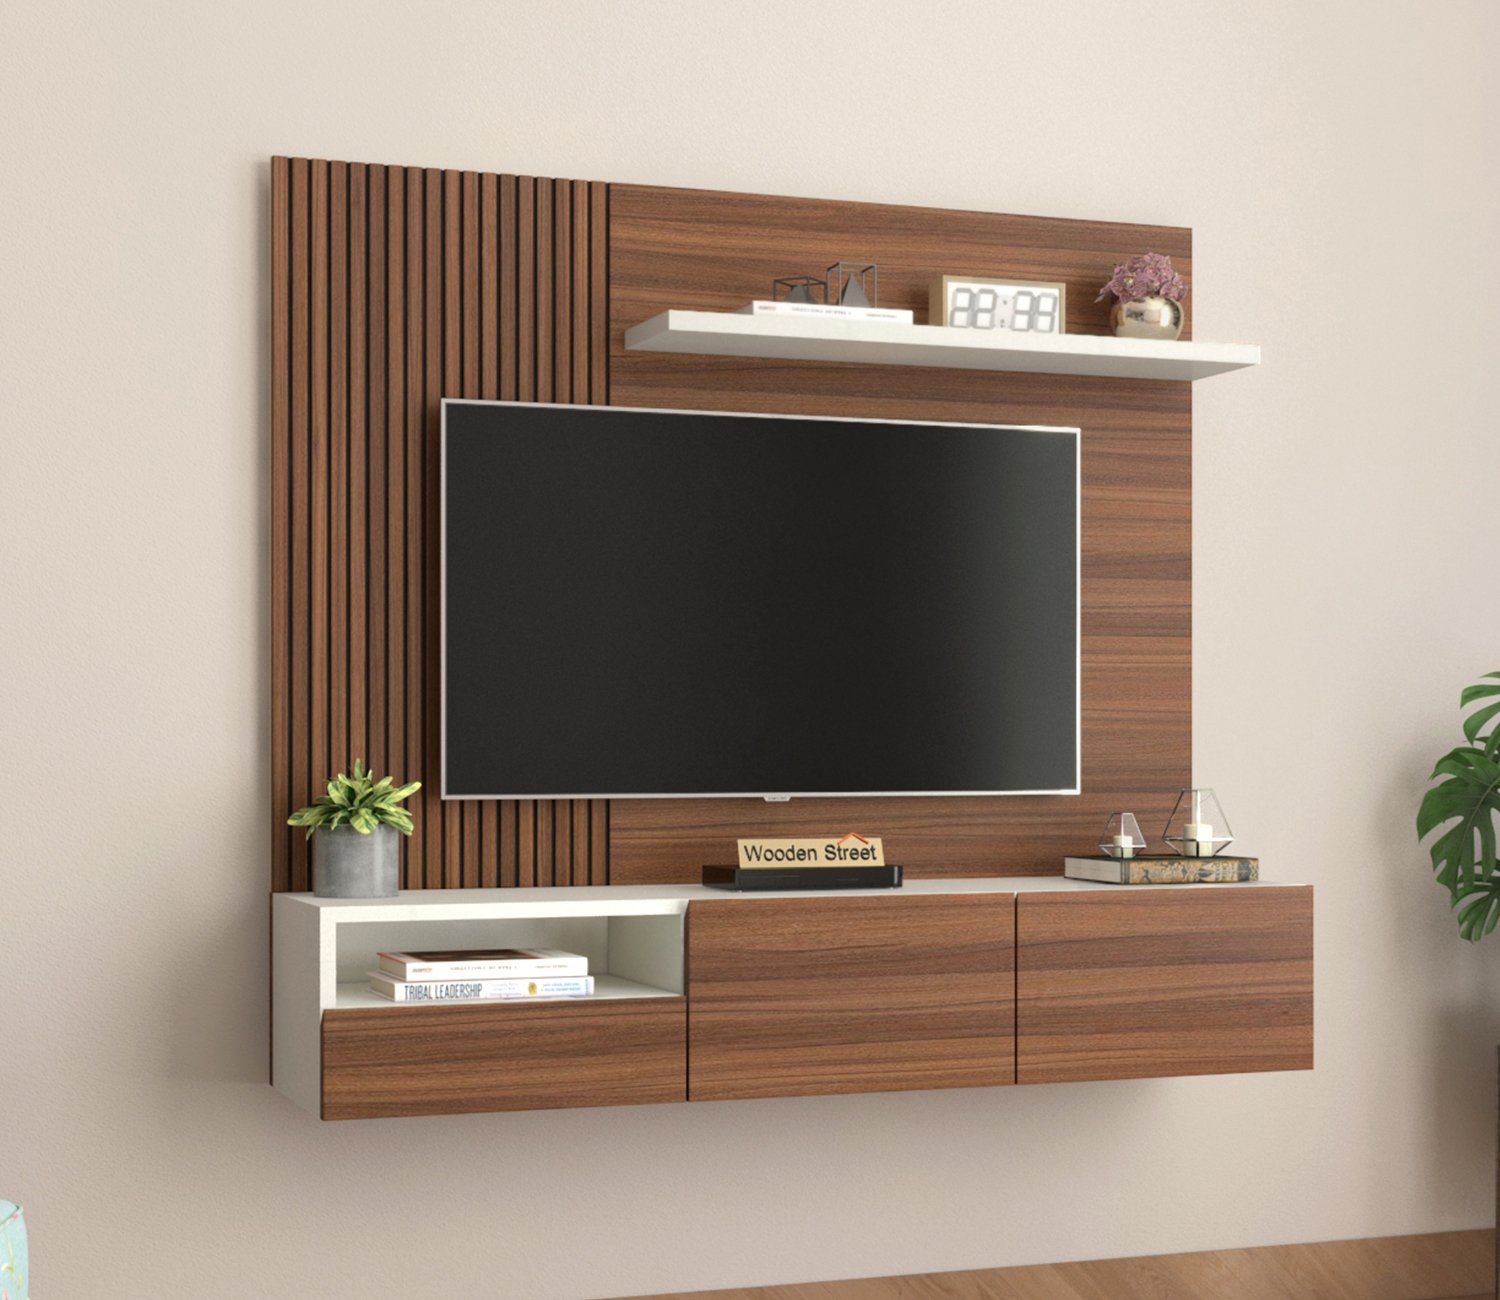 https://righthomestyle.co.uk/table-for-wall-mounted-tv/